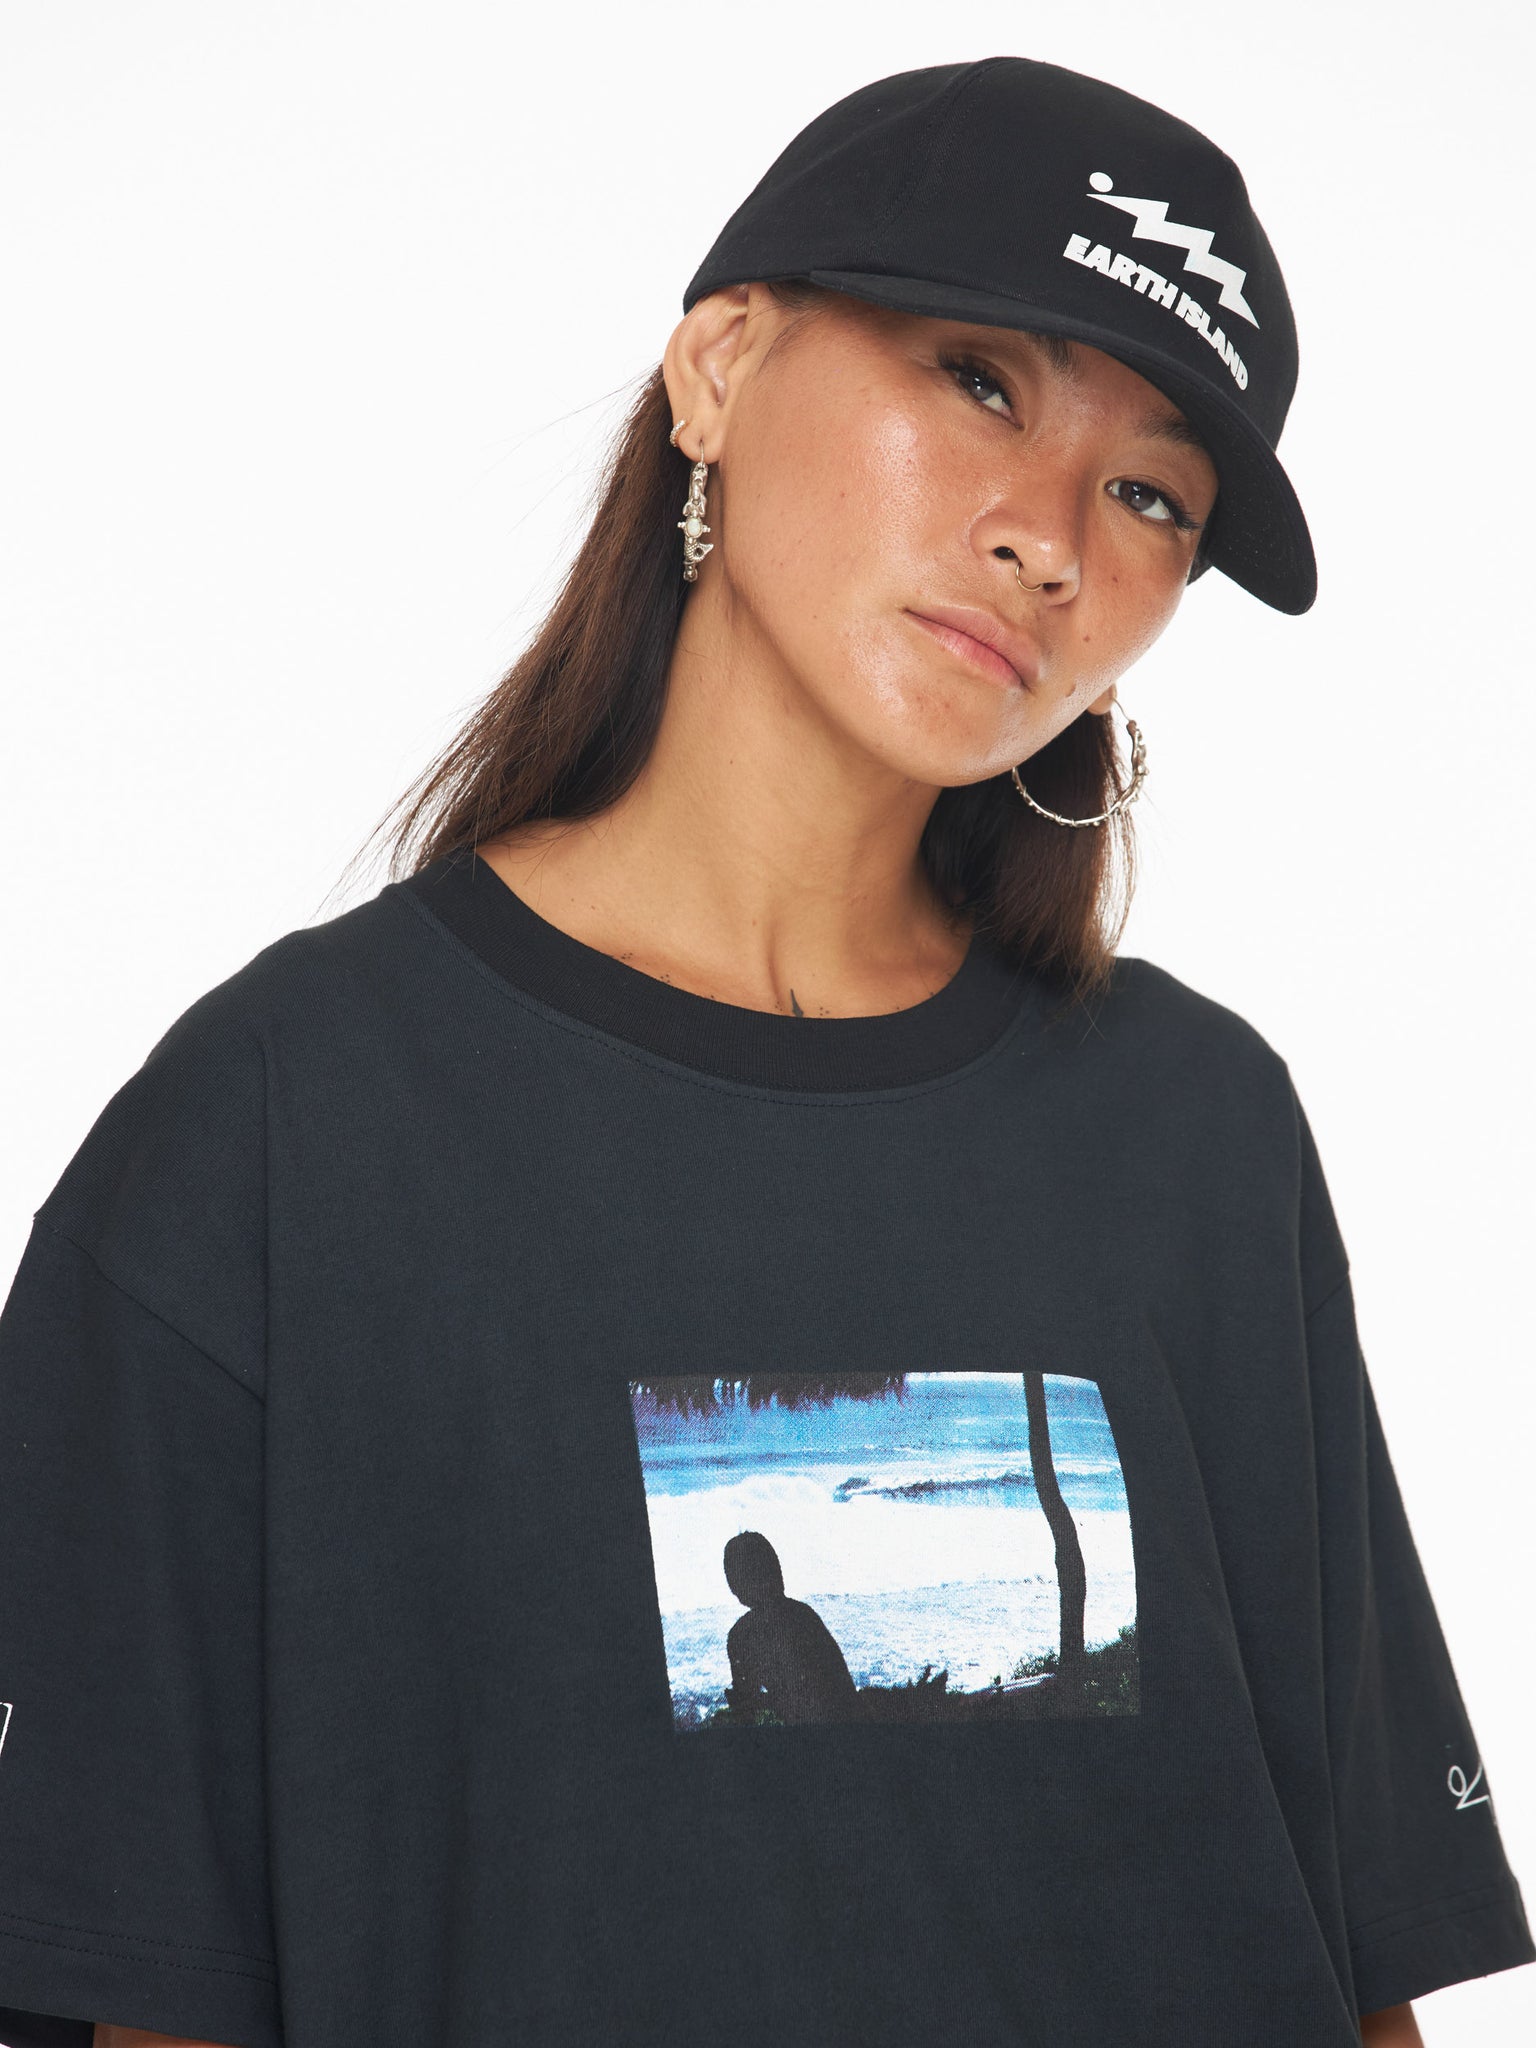 Earth Island - Surf Culture and Lifestyle - Product - Black Cap